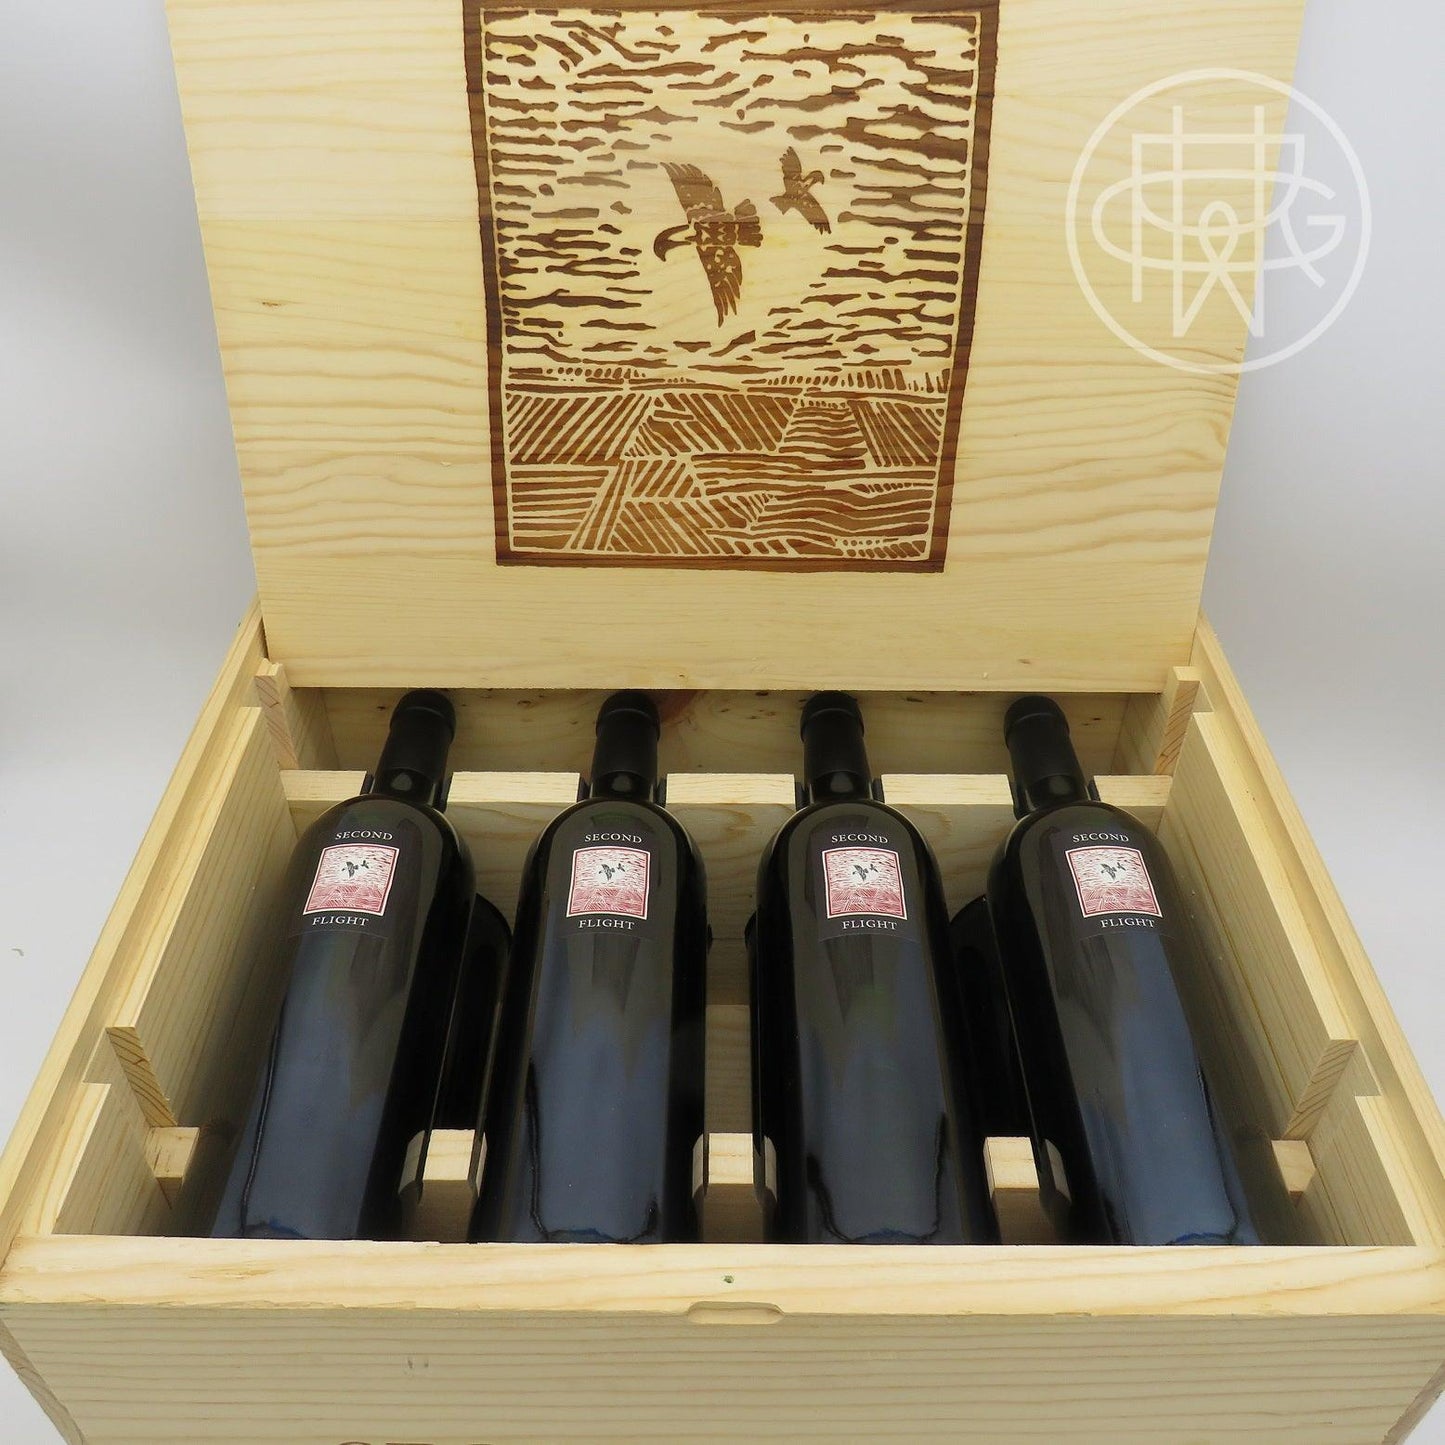 Screaming Eagle Second Flight Vertical (2006-2009) 8-Pack OWC 750mL - GRW Wine Collection